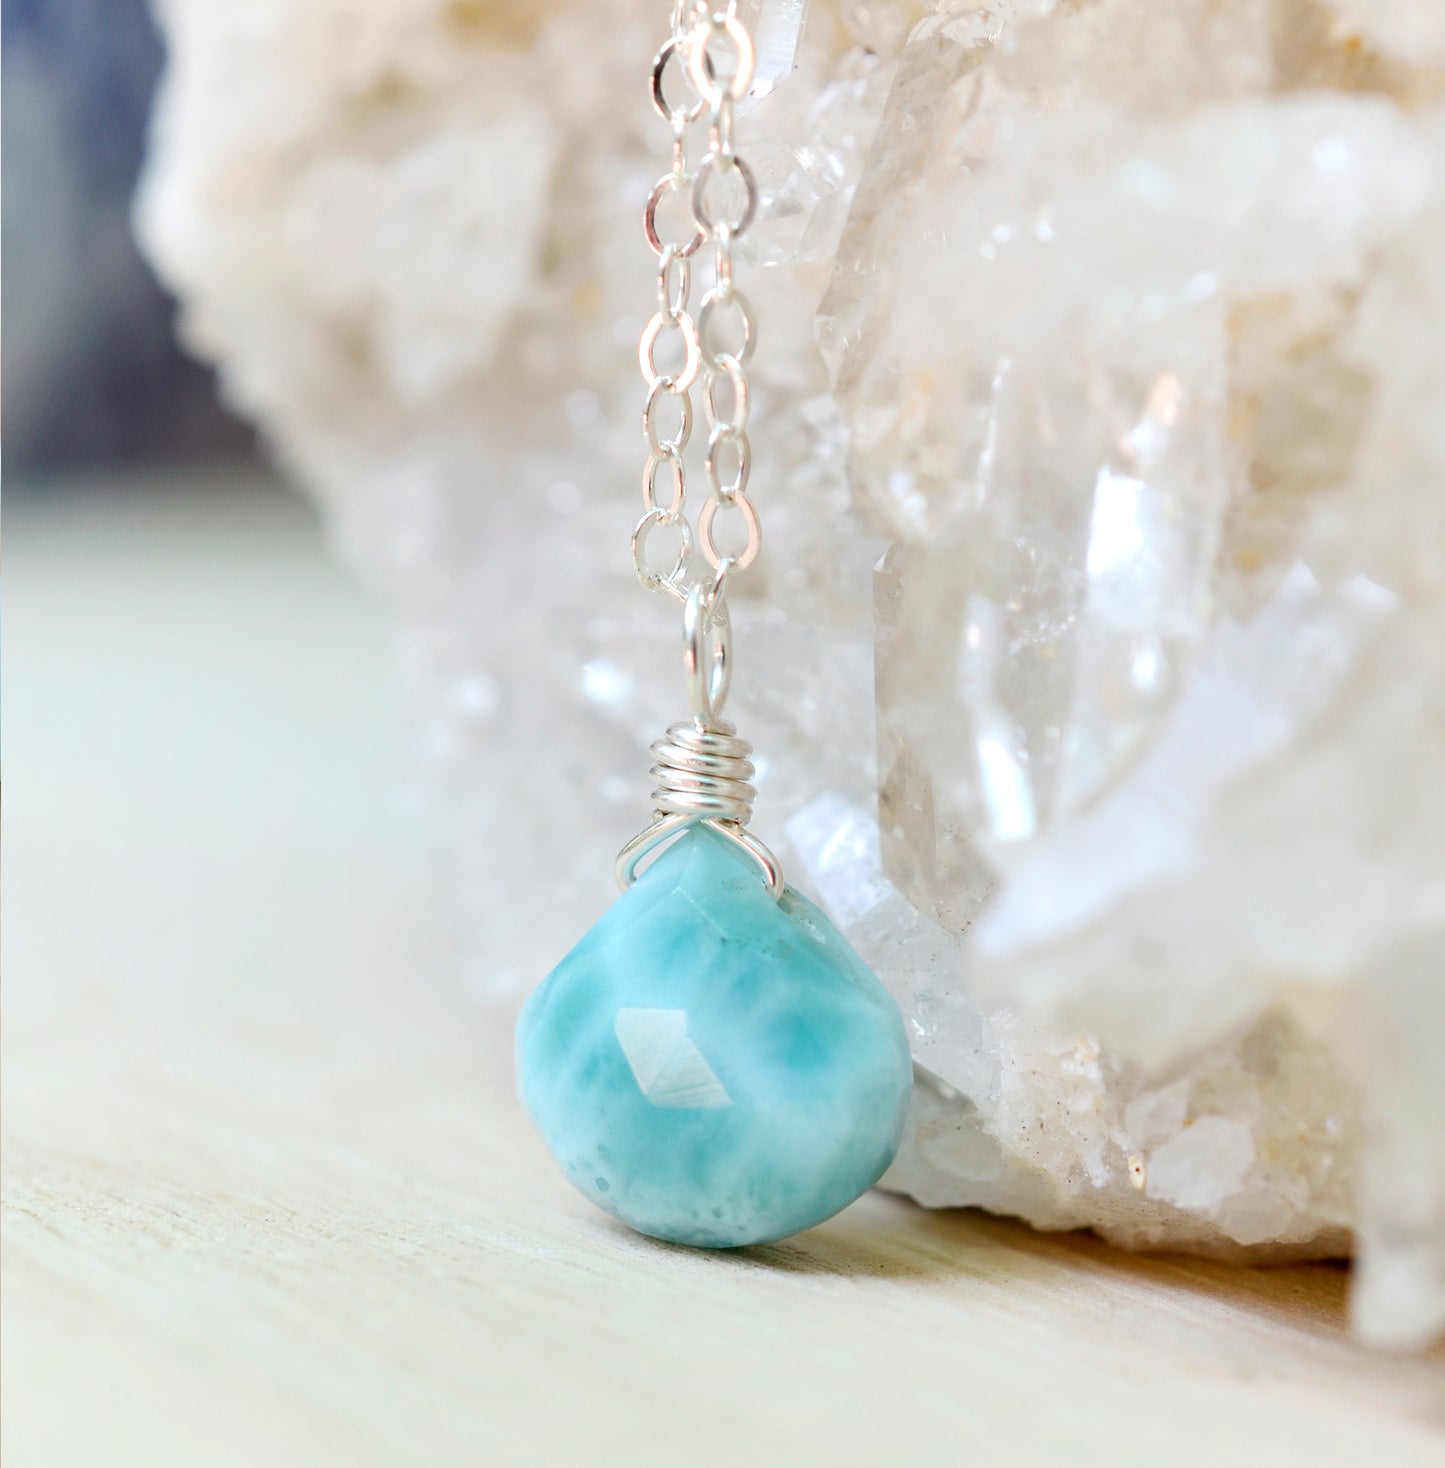 Blue Larimar pendant set onto a sterling silver chain.